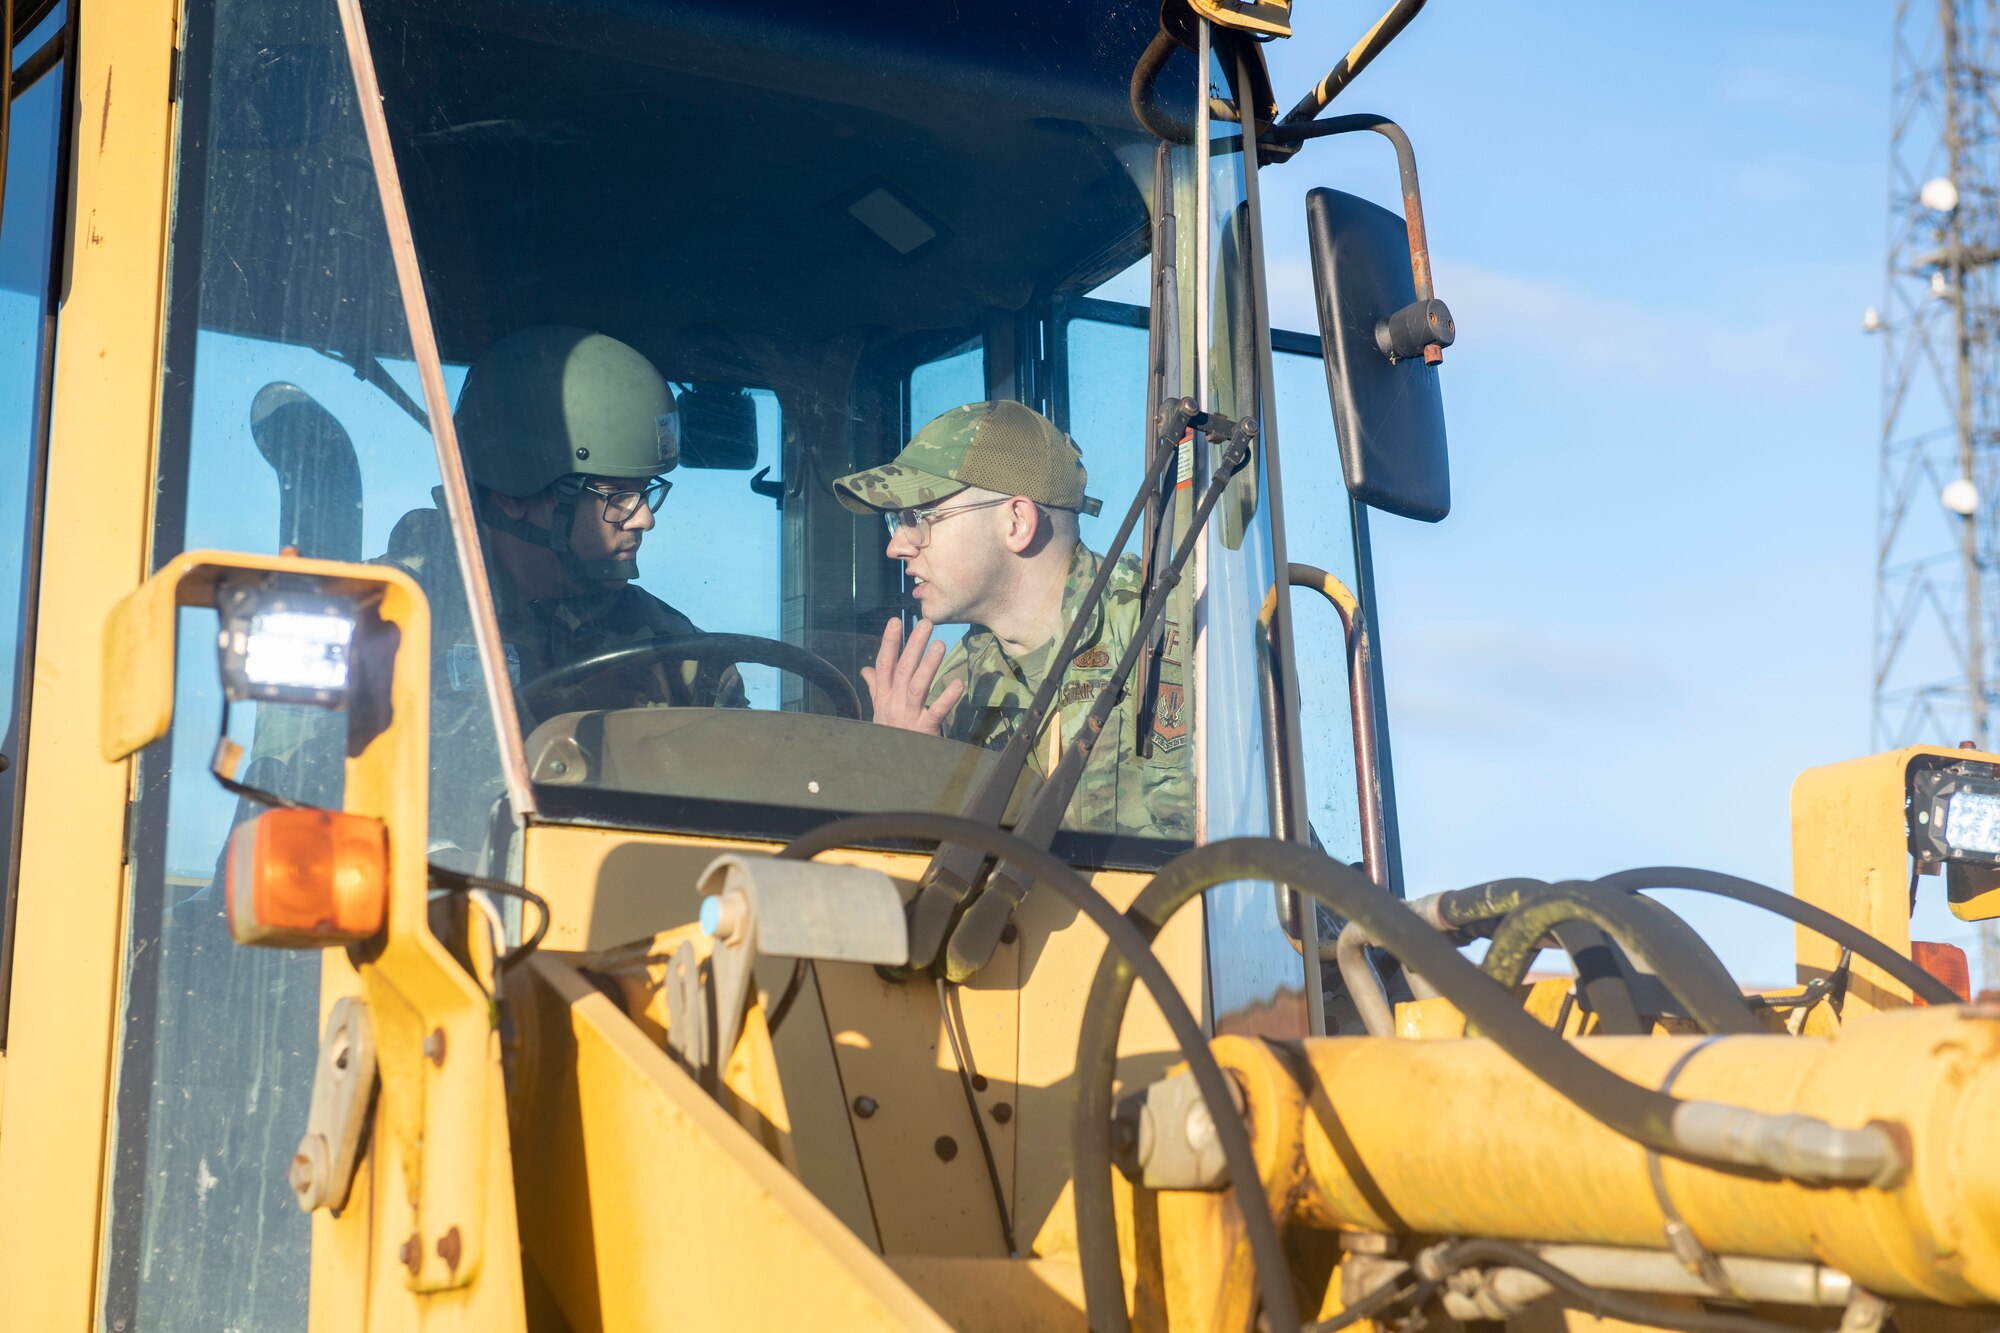 Master Sgt. Wesley Schamberger, 422d Communications Squadron special missions maintenance section chief, right, gives instruction to Airman 1st Class Pavan Vyas, 422d CS network infrastructure technician, on forklift operation at RAF Barford St. John